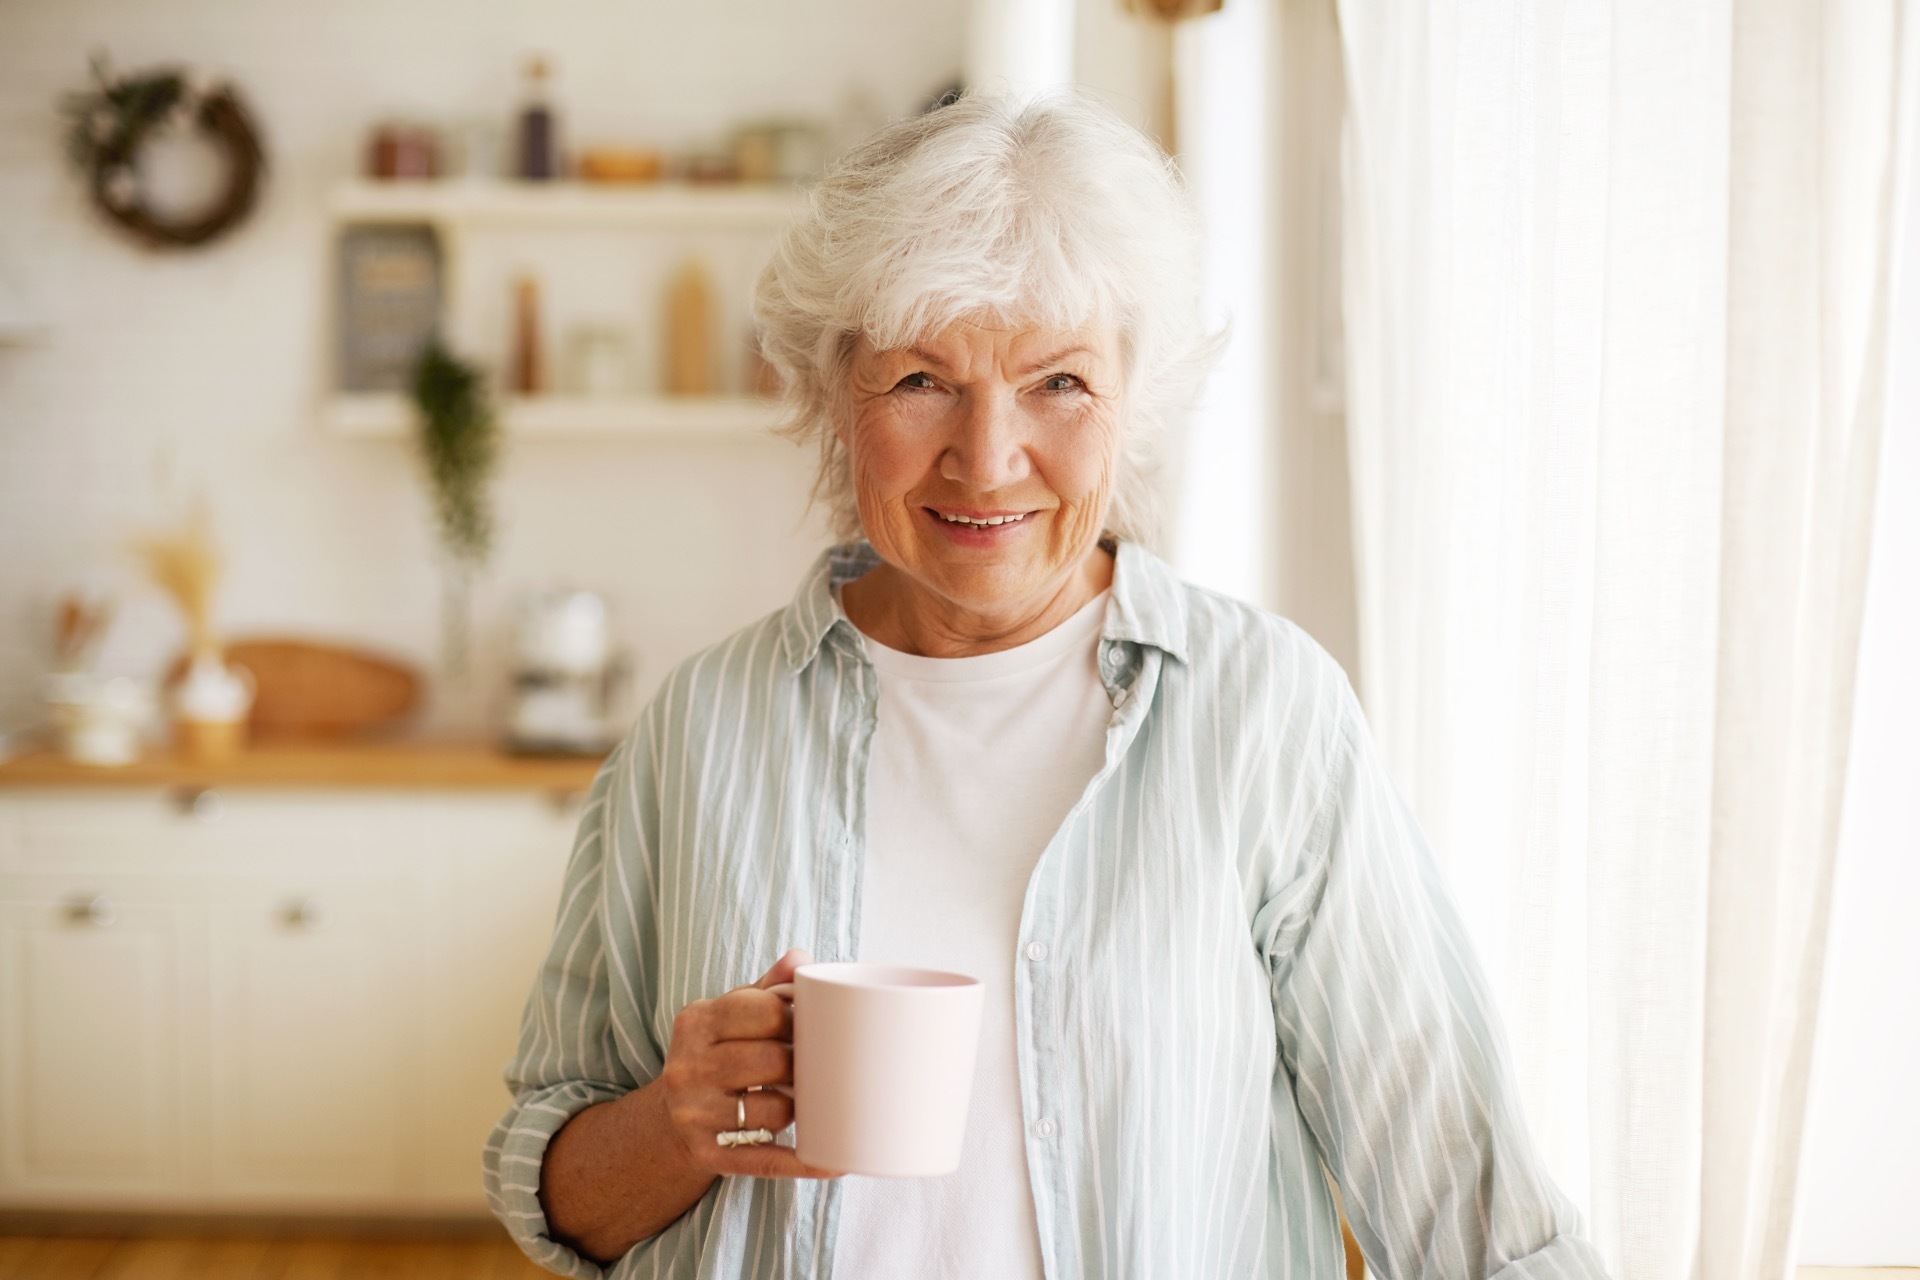 An older person, standing in a kitchen, holding a mug of drink and smiling at the camera; our Solicitors for the Elderly accredited Solicitor, Naomi Pinder, discusses care fees and future planning.